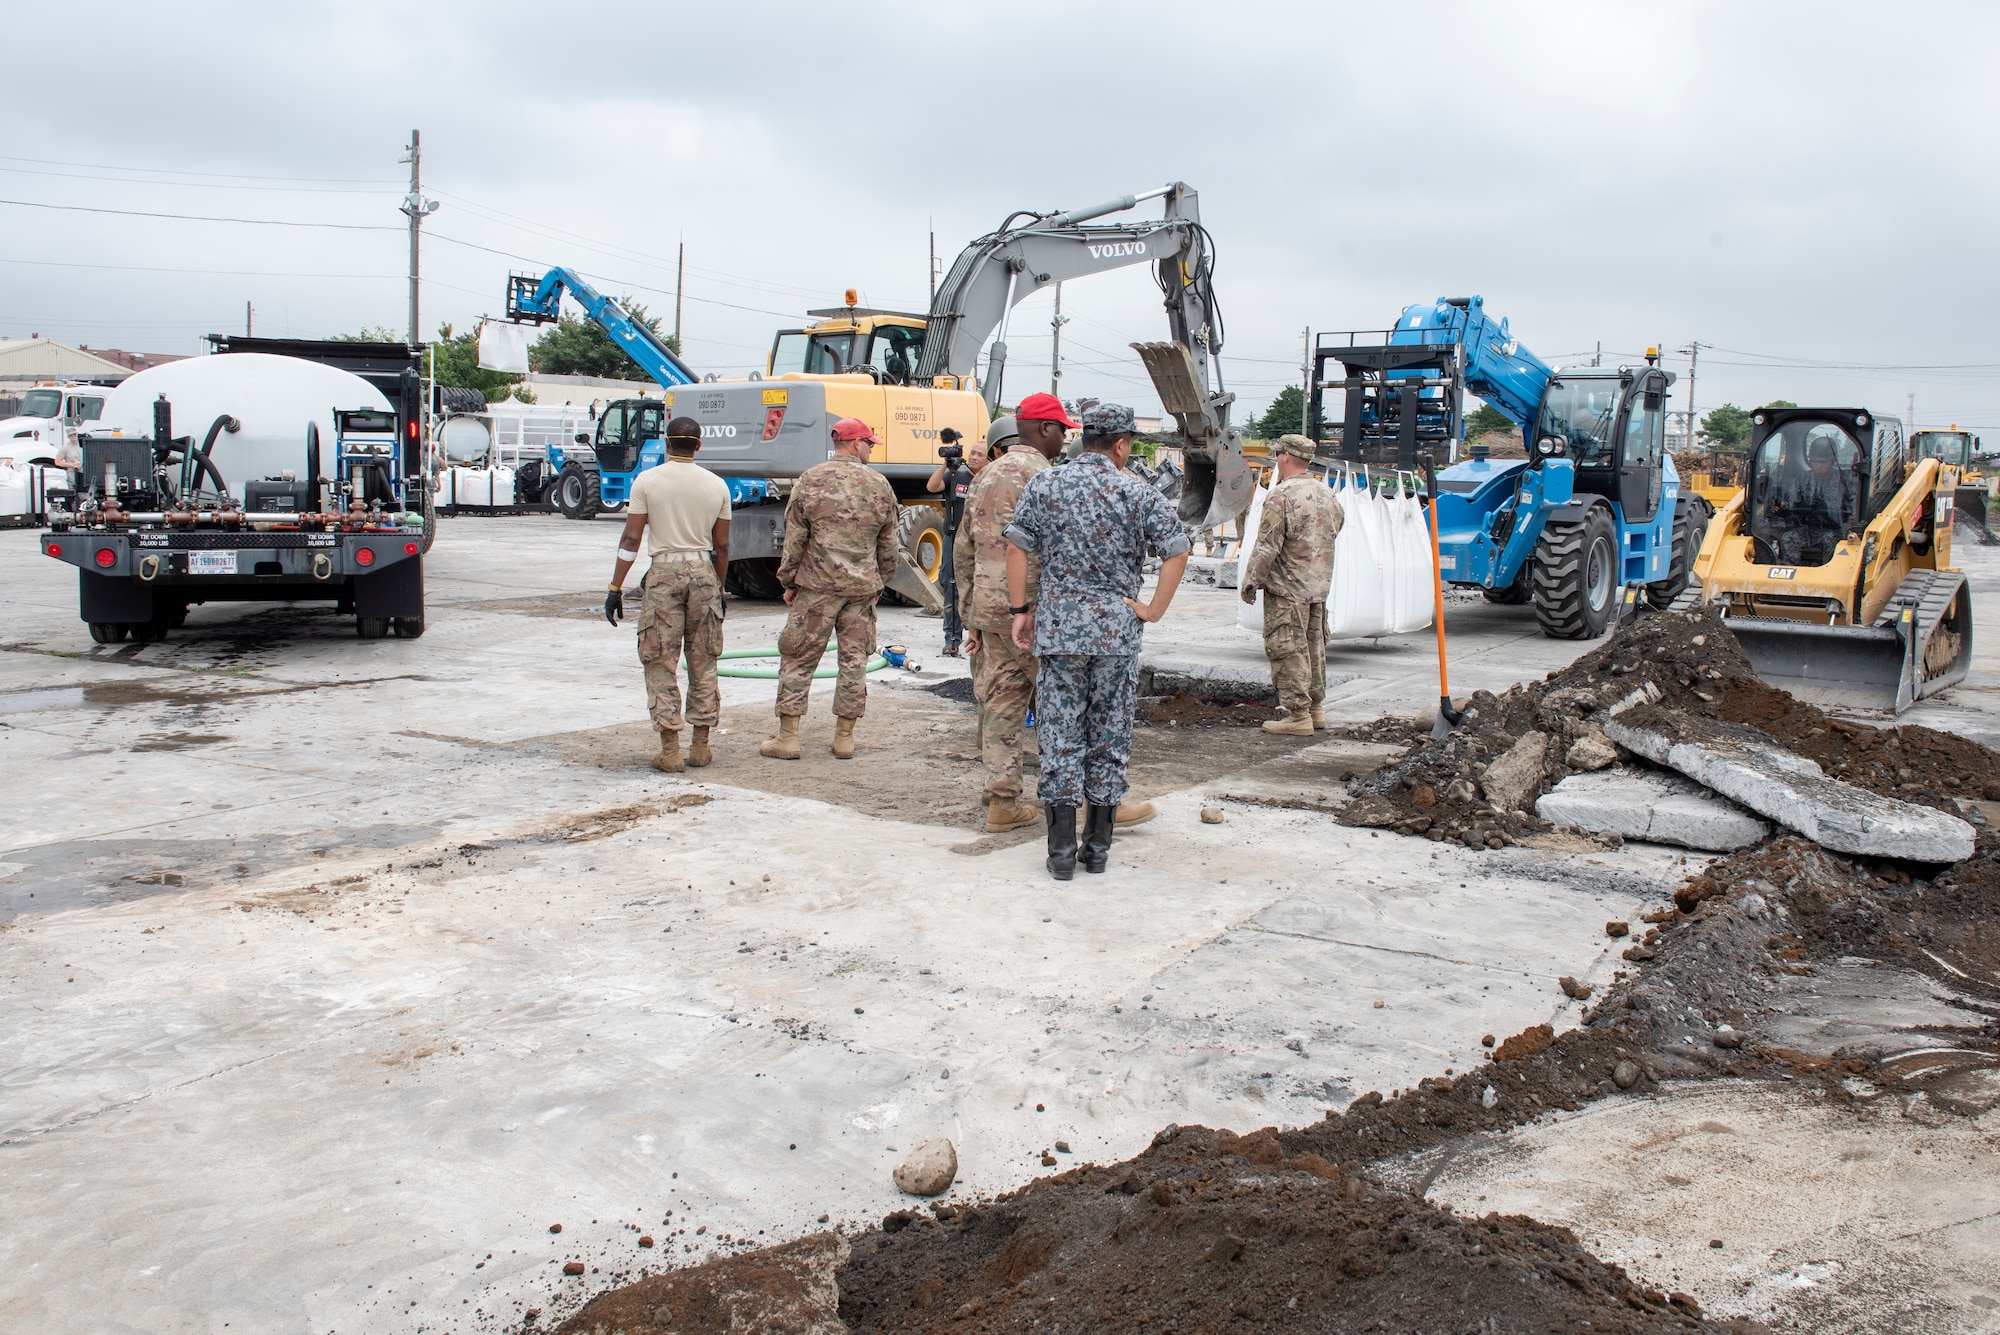 U.S. Air Force and the Japan Air Self-Defense Force (JASDF) civil engineers work together to conduct rapid airfield damage repair (RADR) during Pacific Unity 2019 at Yokota Air Base, Japan, August 22, 2019.